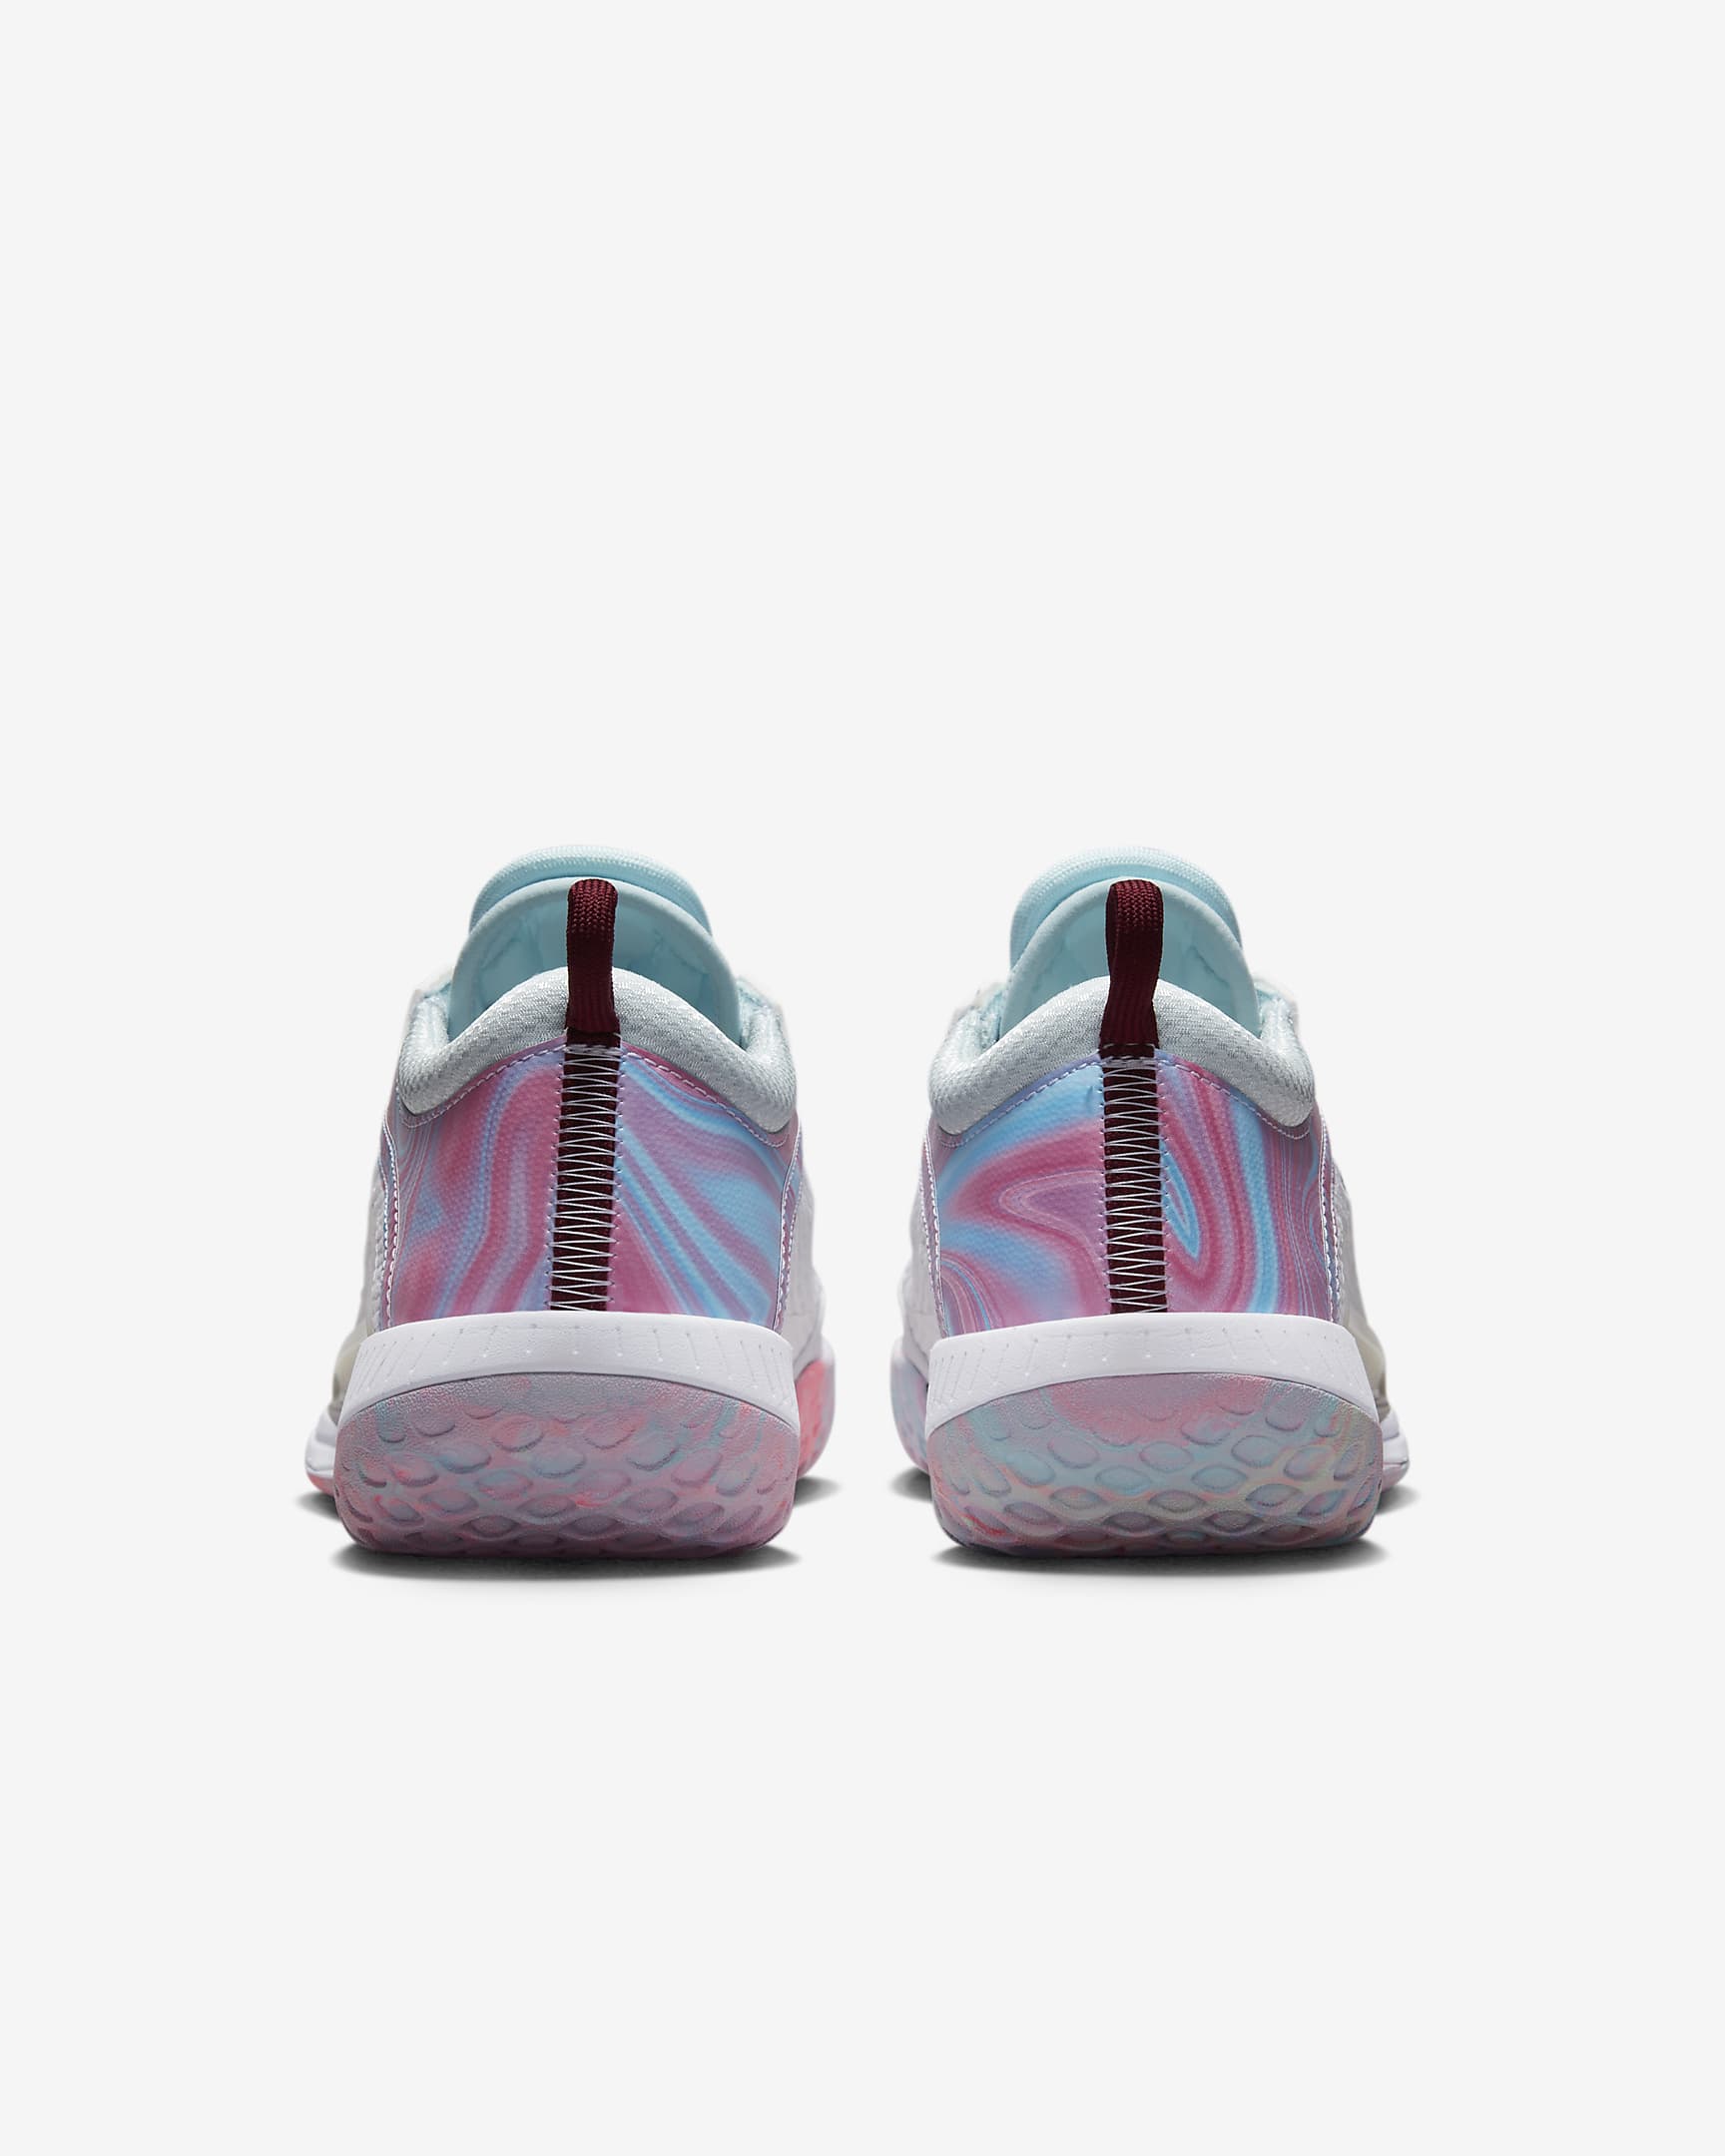 nikecourt-zoom-nxt-womens-hard-court-tennis-shoes-q1kBsH.png